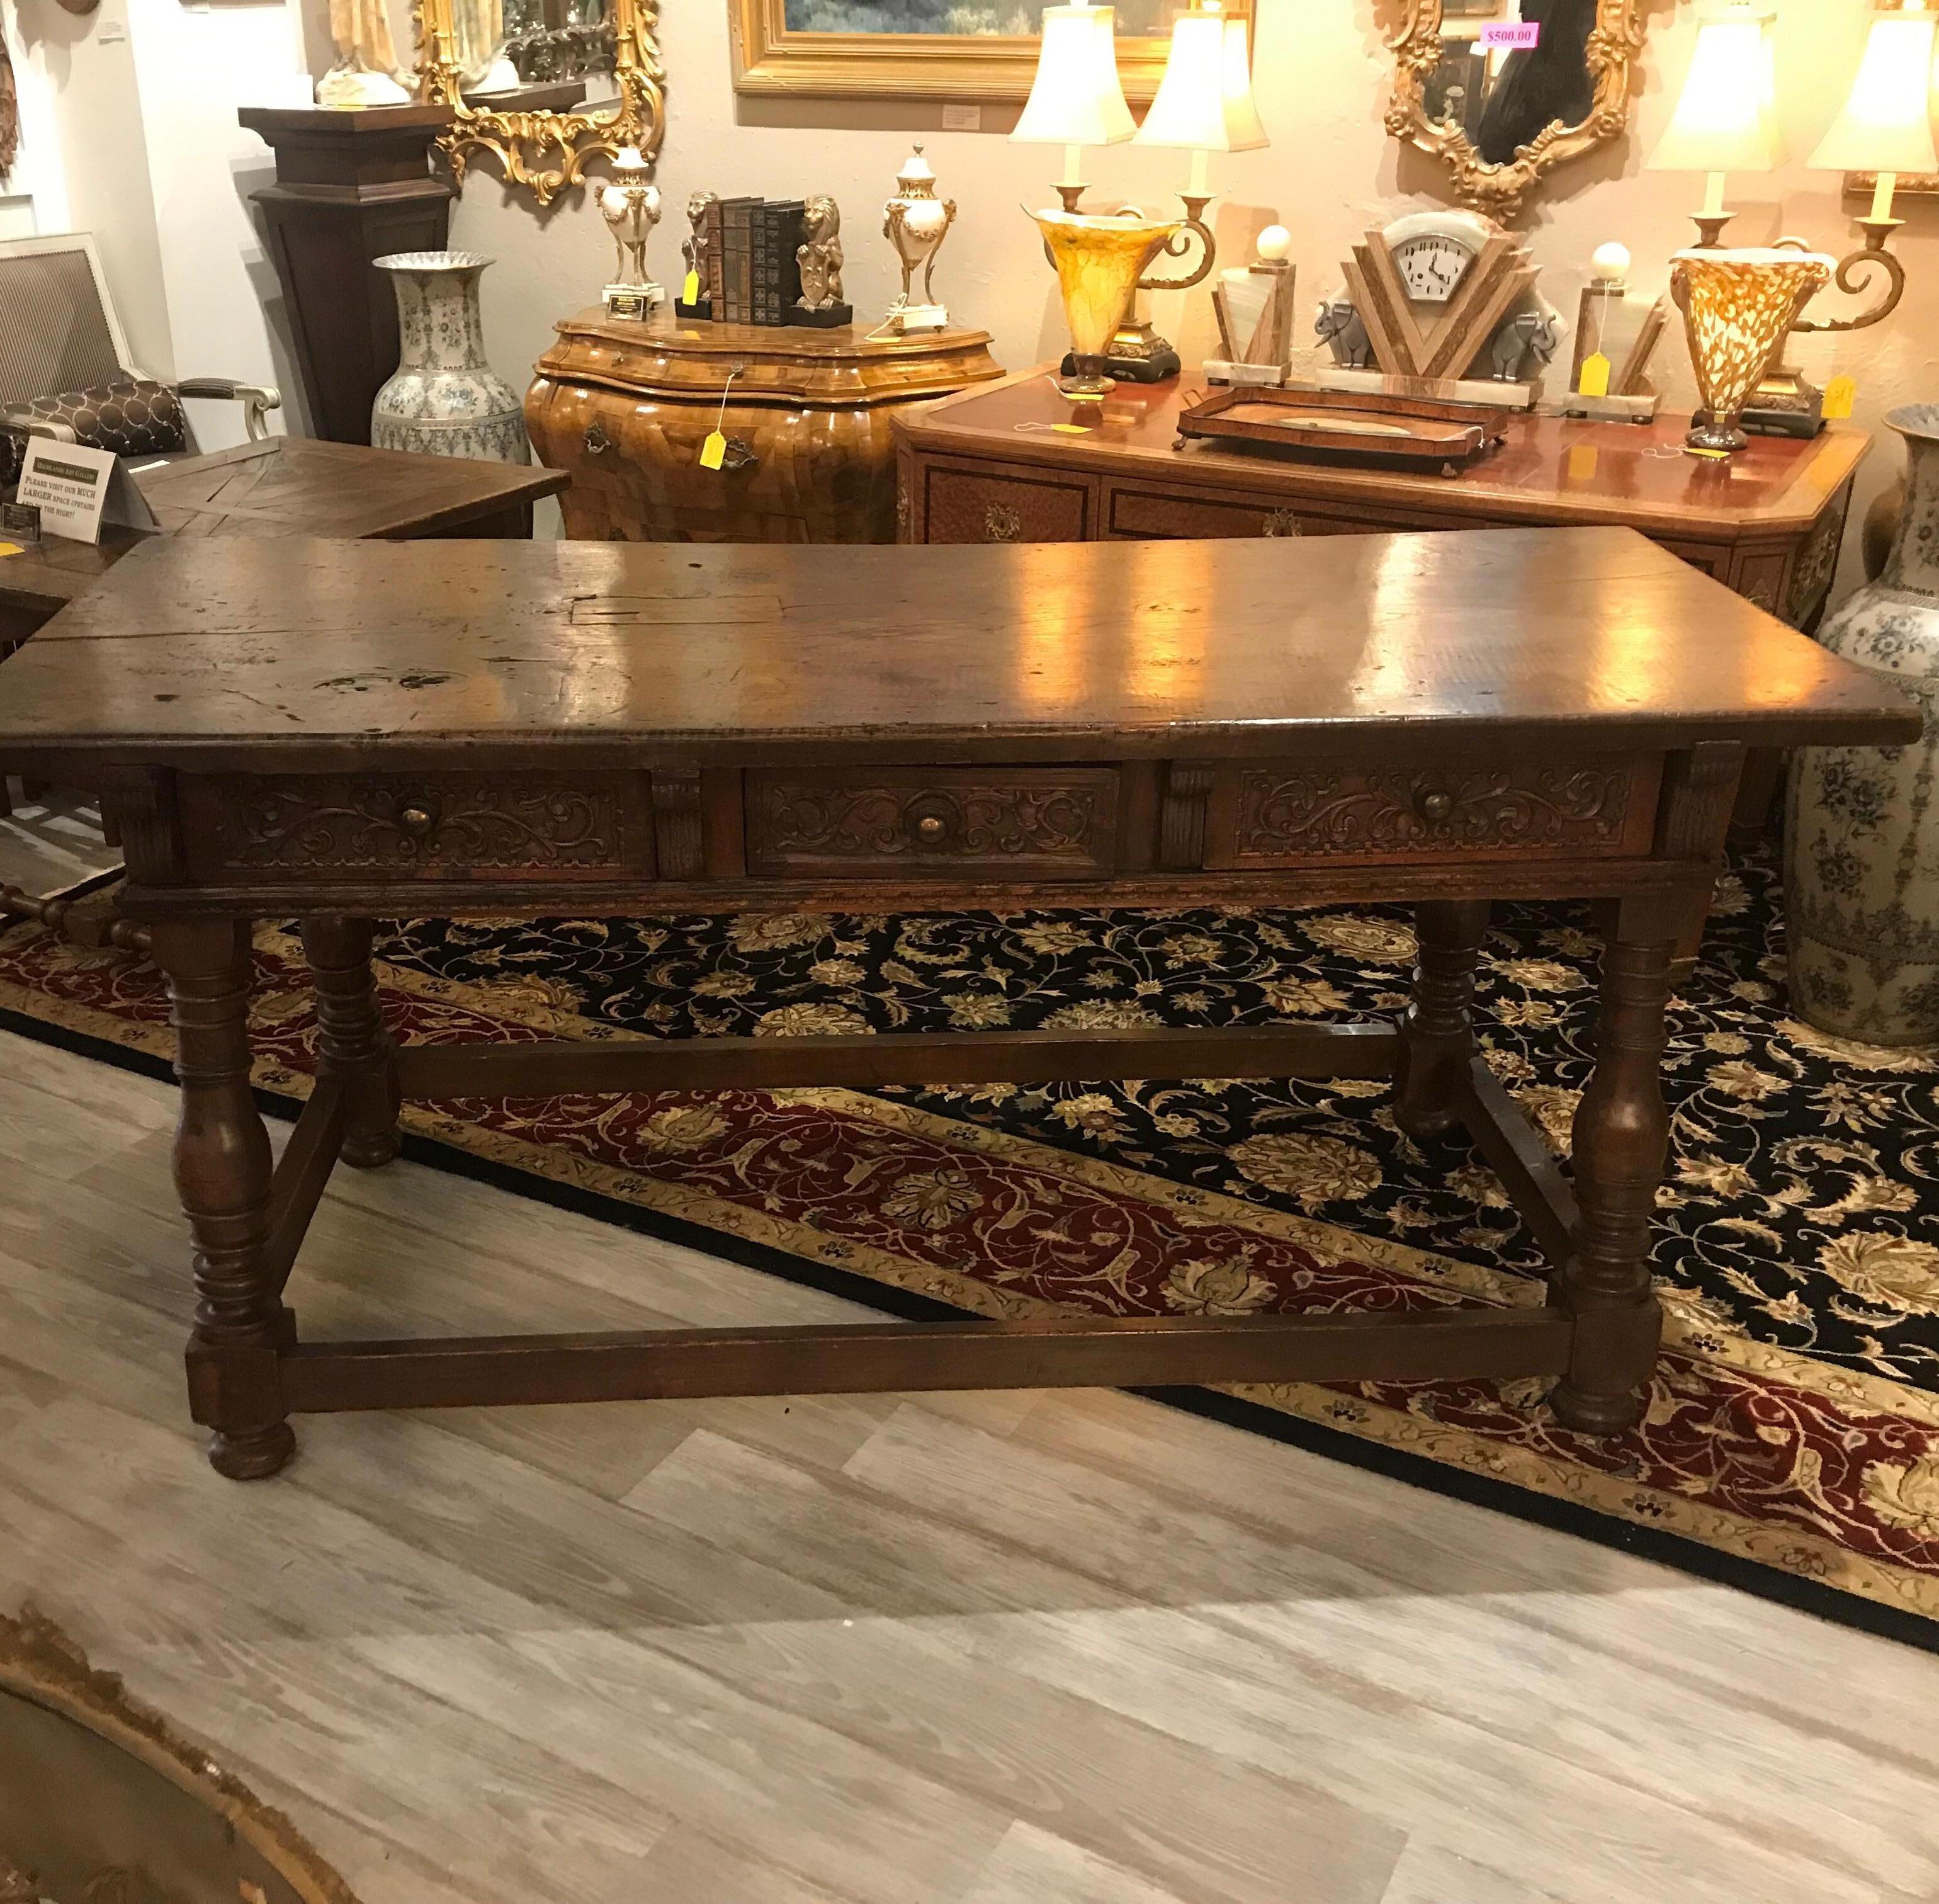 Remarkable late 17th century Italian pub or wine tasting table with three hand carved drawers. The finish has been French polished but still preserves the centuries of use and wear that makes this table truly one of a kind. There are old repairs and